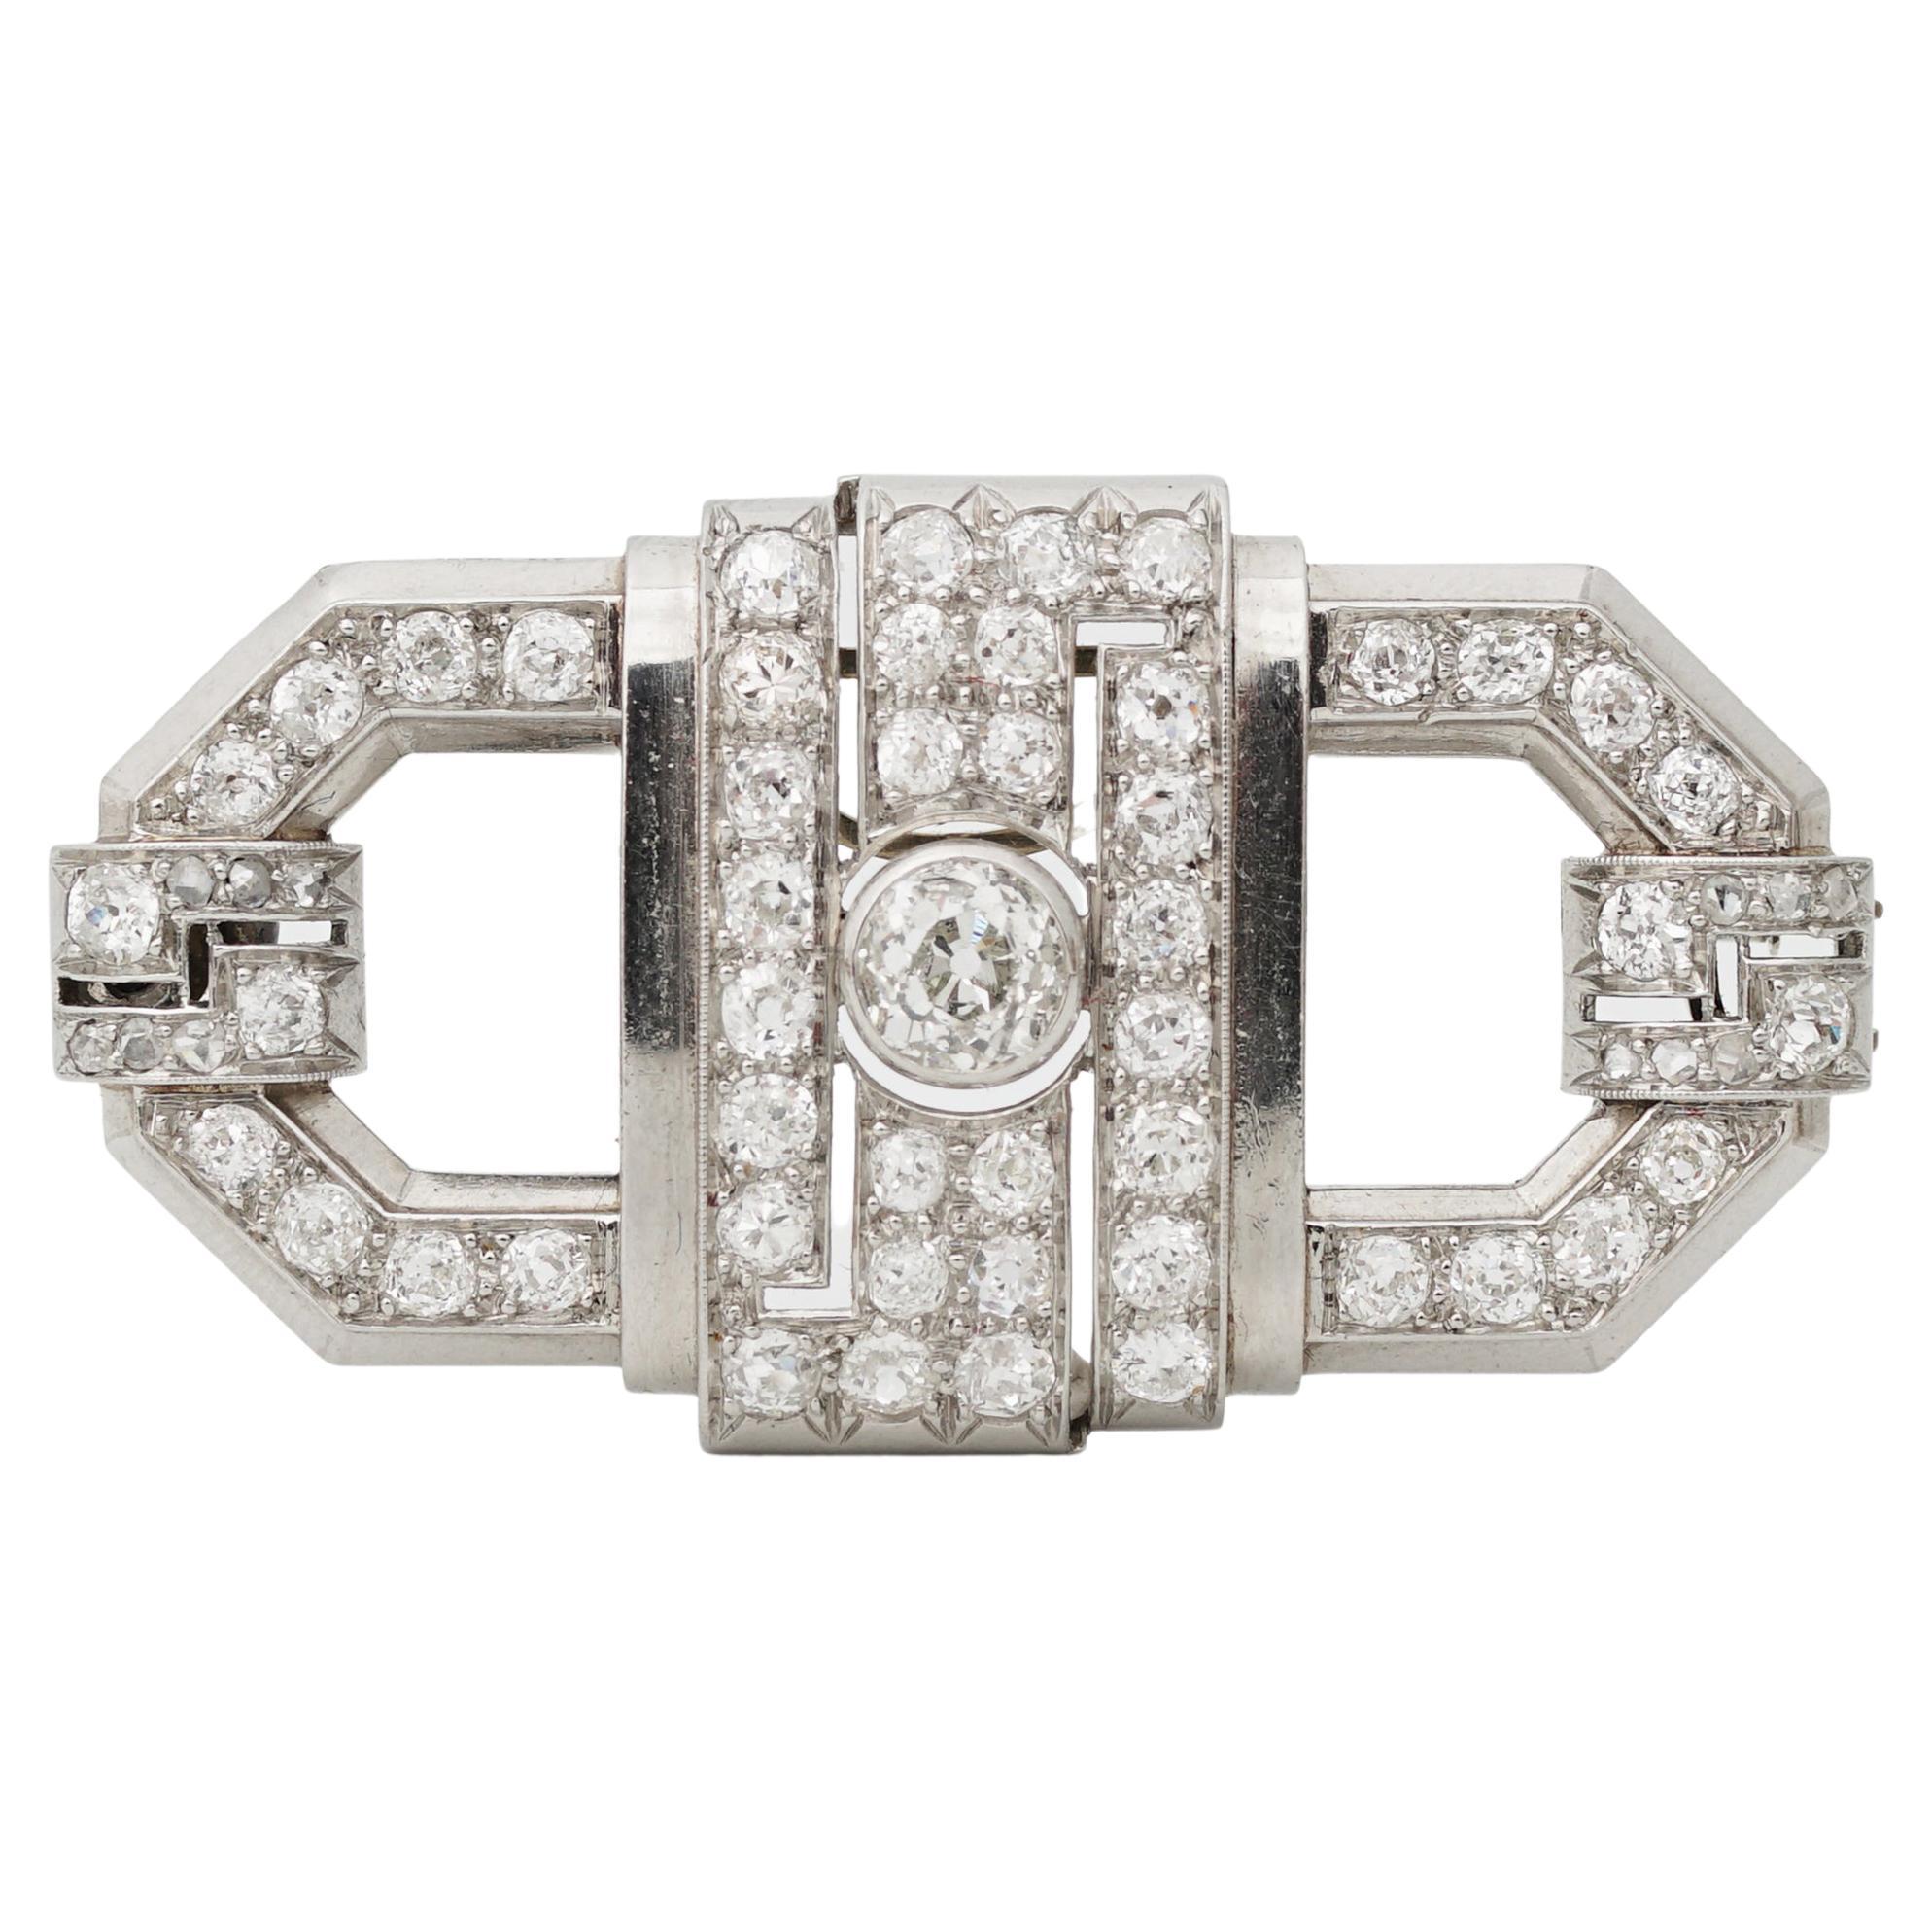 French Art Deco White Gold and Diamond Brooch, C. 1930